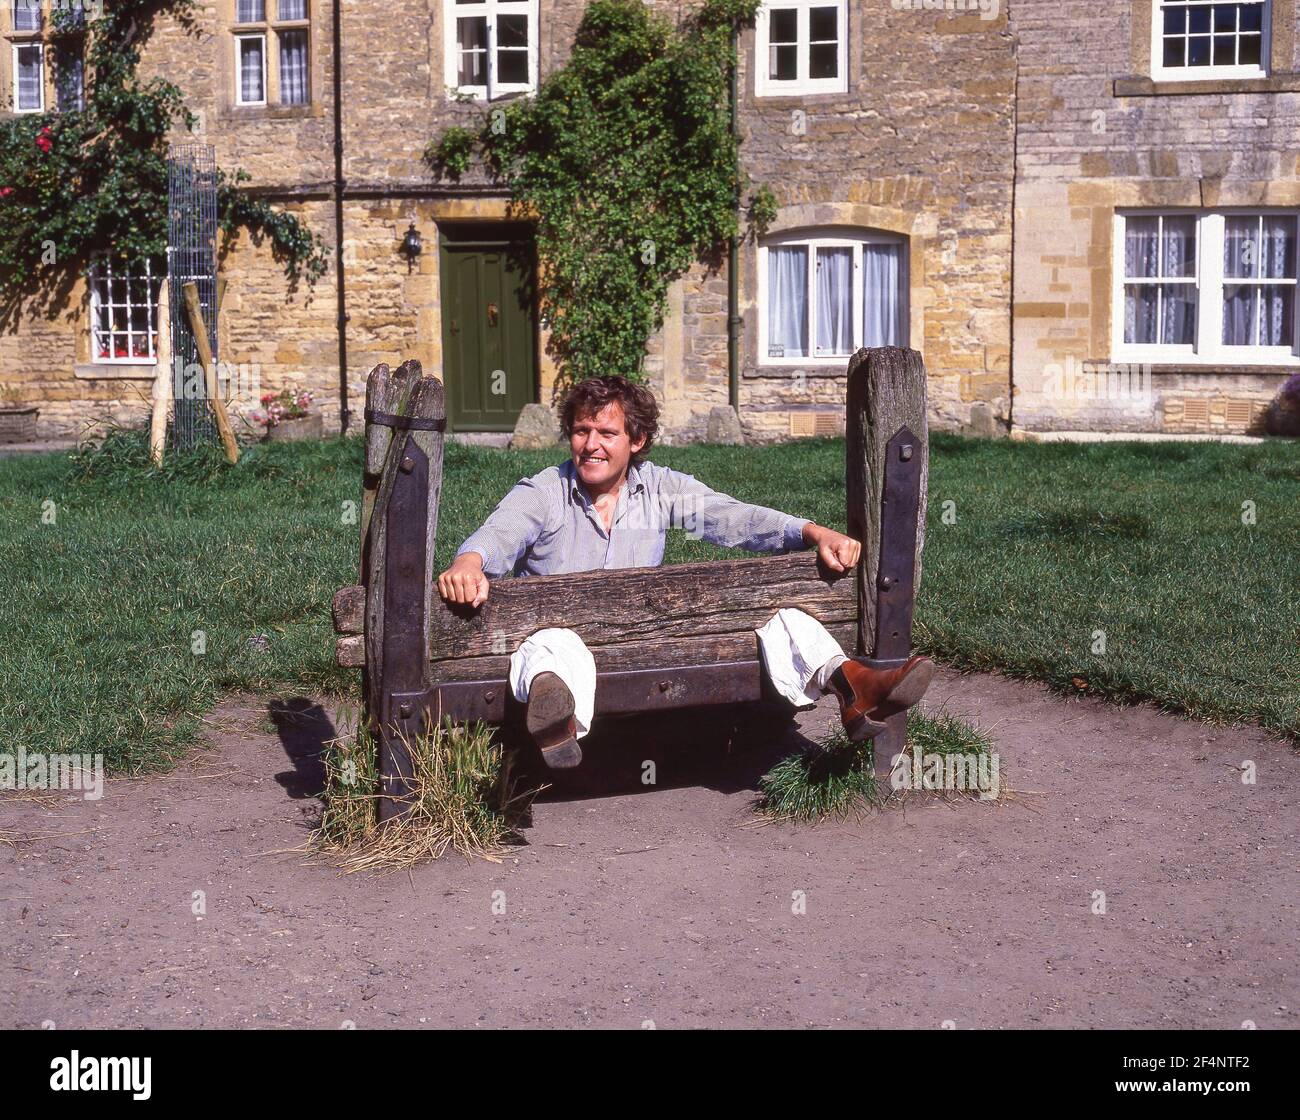 Young man posing in village stocks, Market Square, Stow-on-the-Wold, Gloucestershire, England, United Kingdom Stock Photo